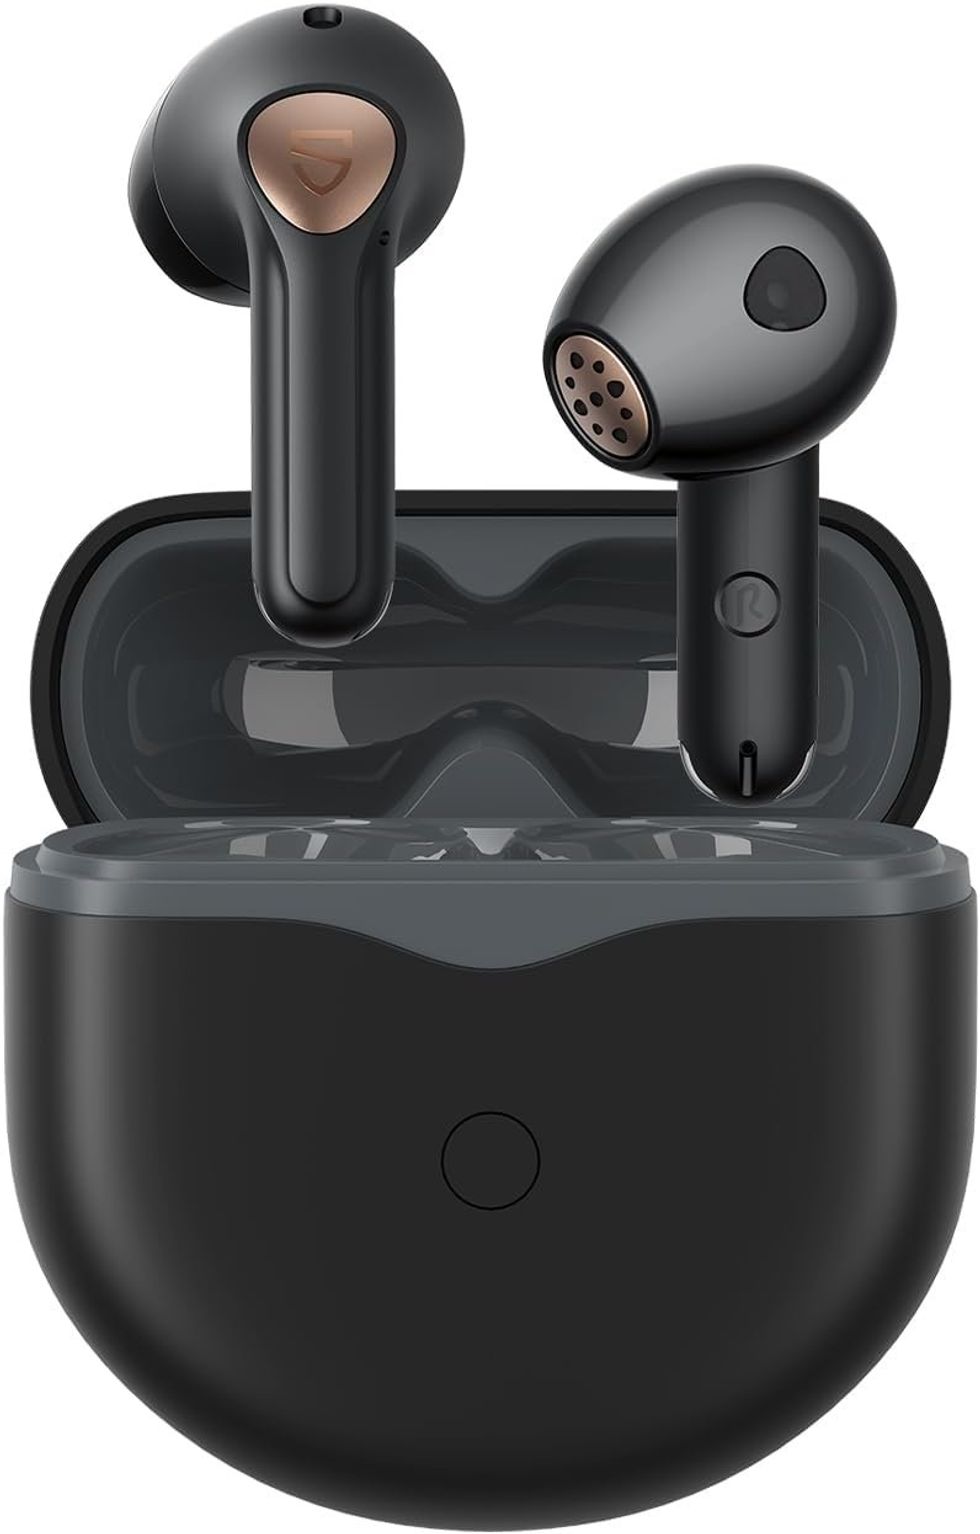 a photo of Soundpeats Air4 Wireless earbuds